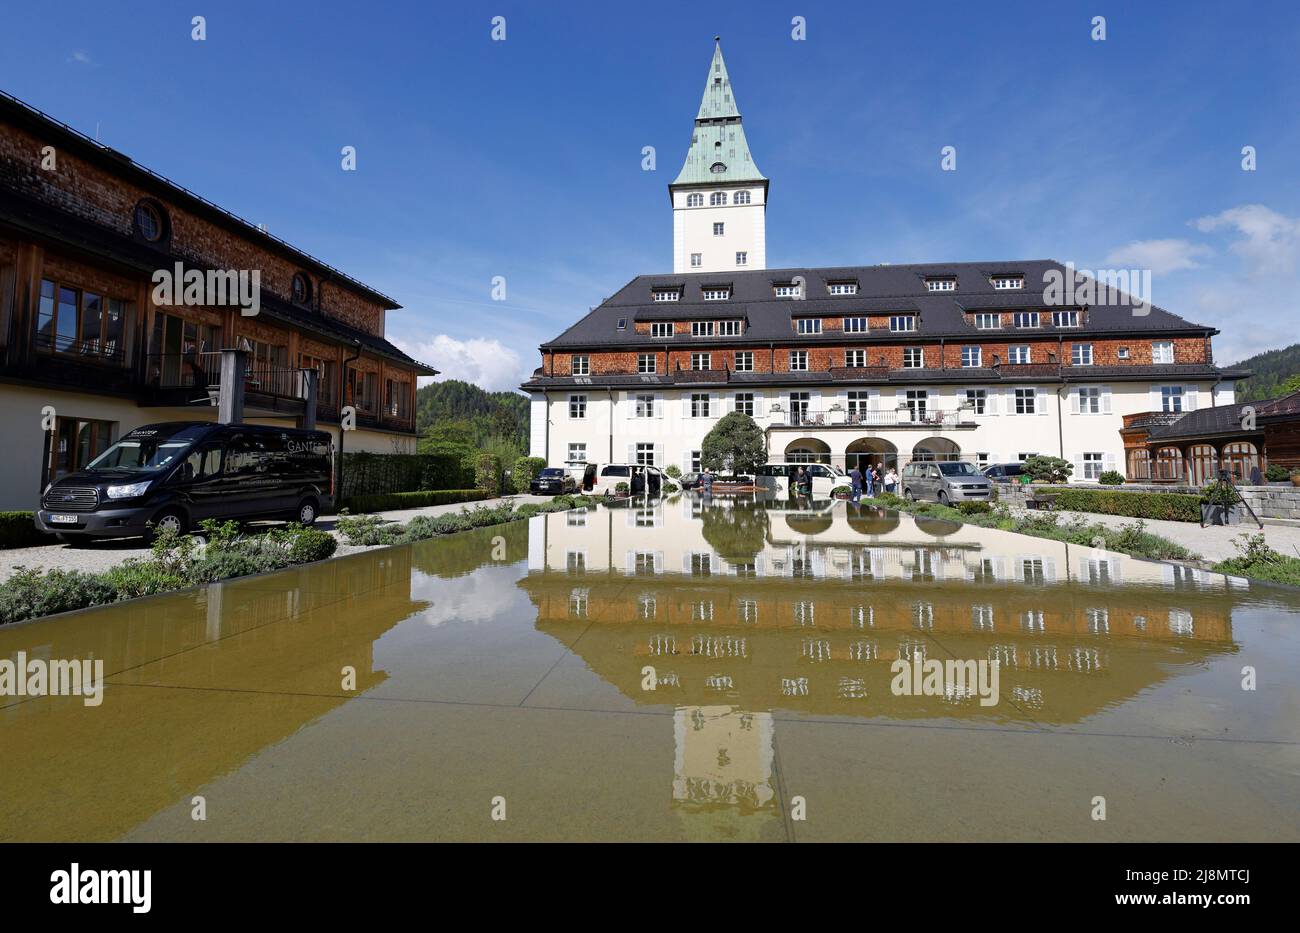 A general view shows the hotel Castle Elmau, where the G7 Summit will be held in June 2022, in Kruen, near the southern Bavarian resort of Garmisch-Partenkirchen, Germany, May 17, 2022. REUTERS/Michaela Rehle Stock Photo